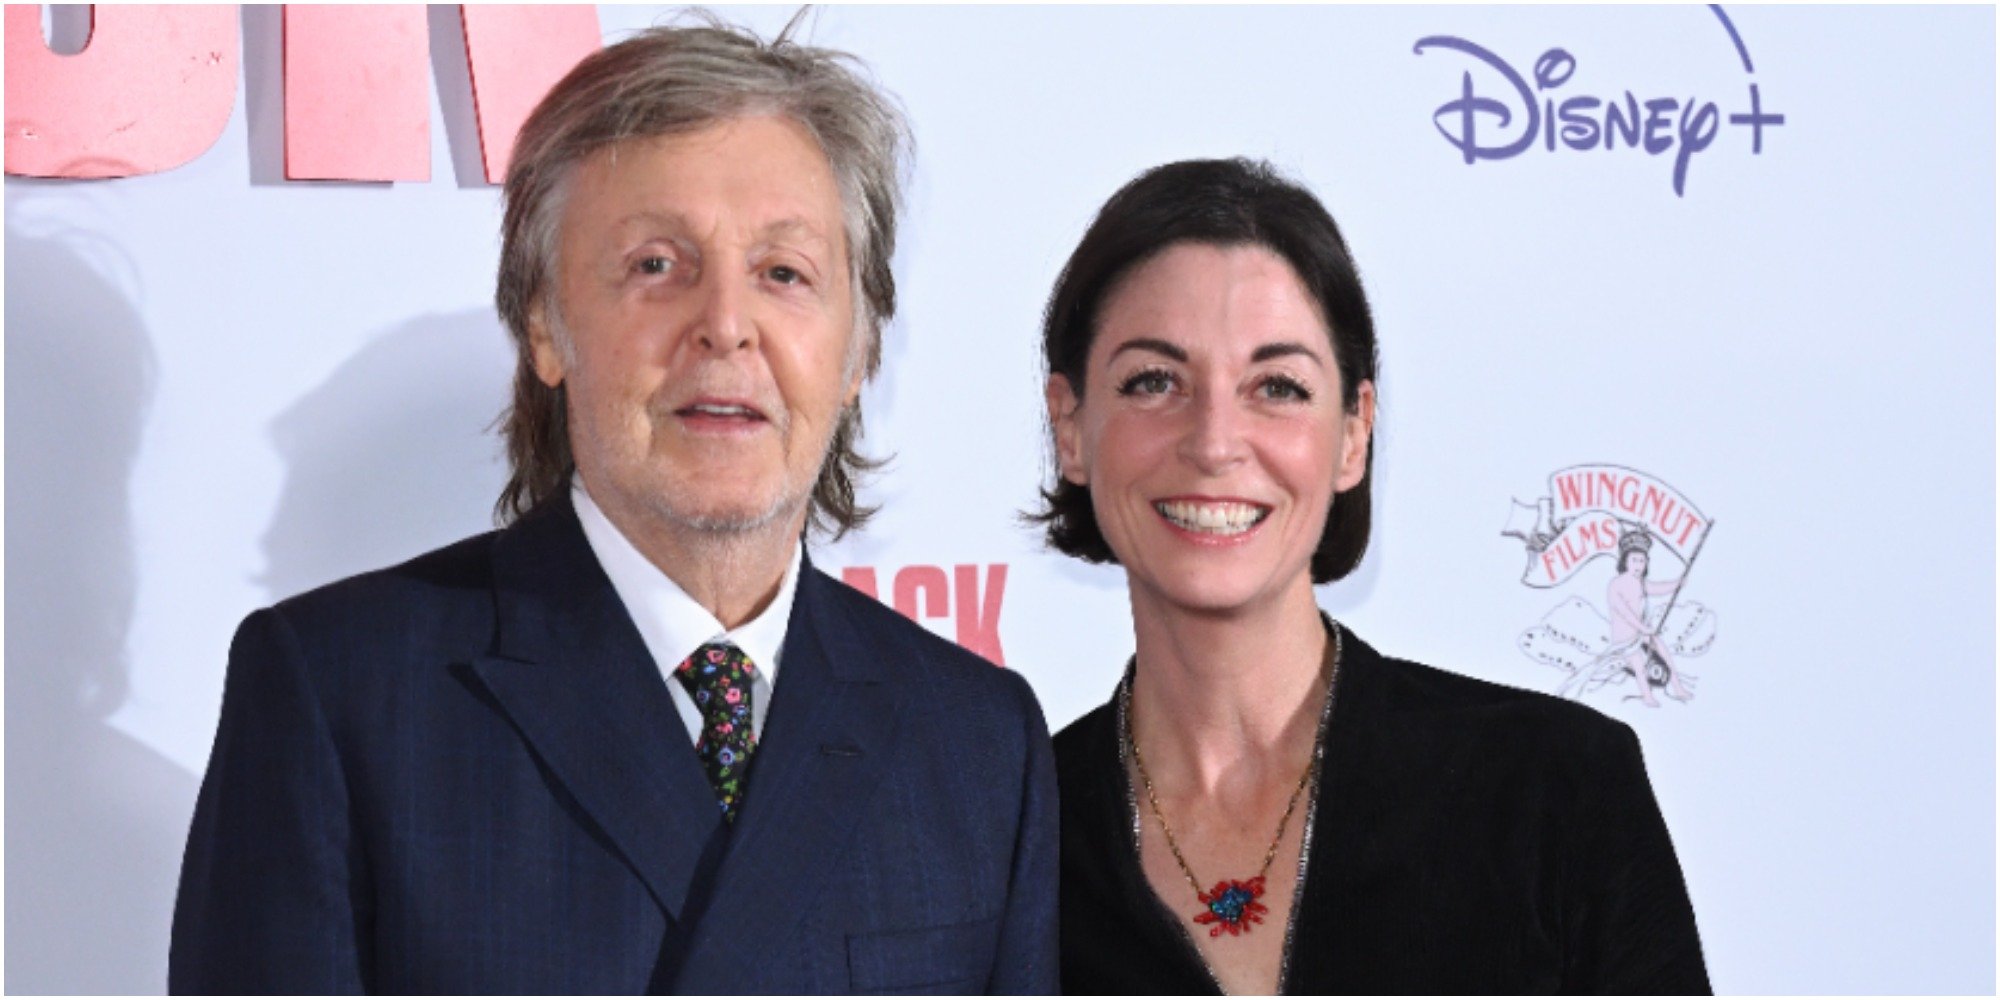 Paul McCartney and his daughter Mary pose on the red carpet for the premiere of "Get Back."